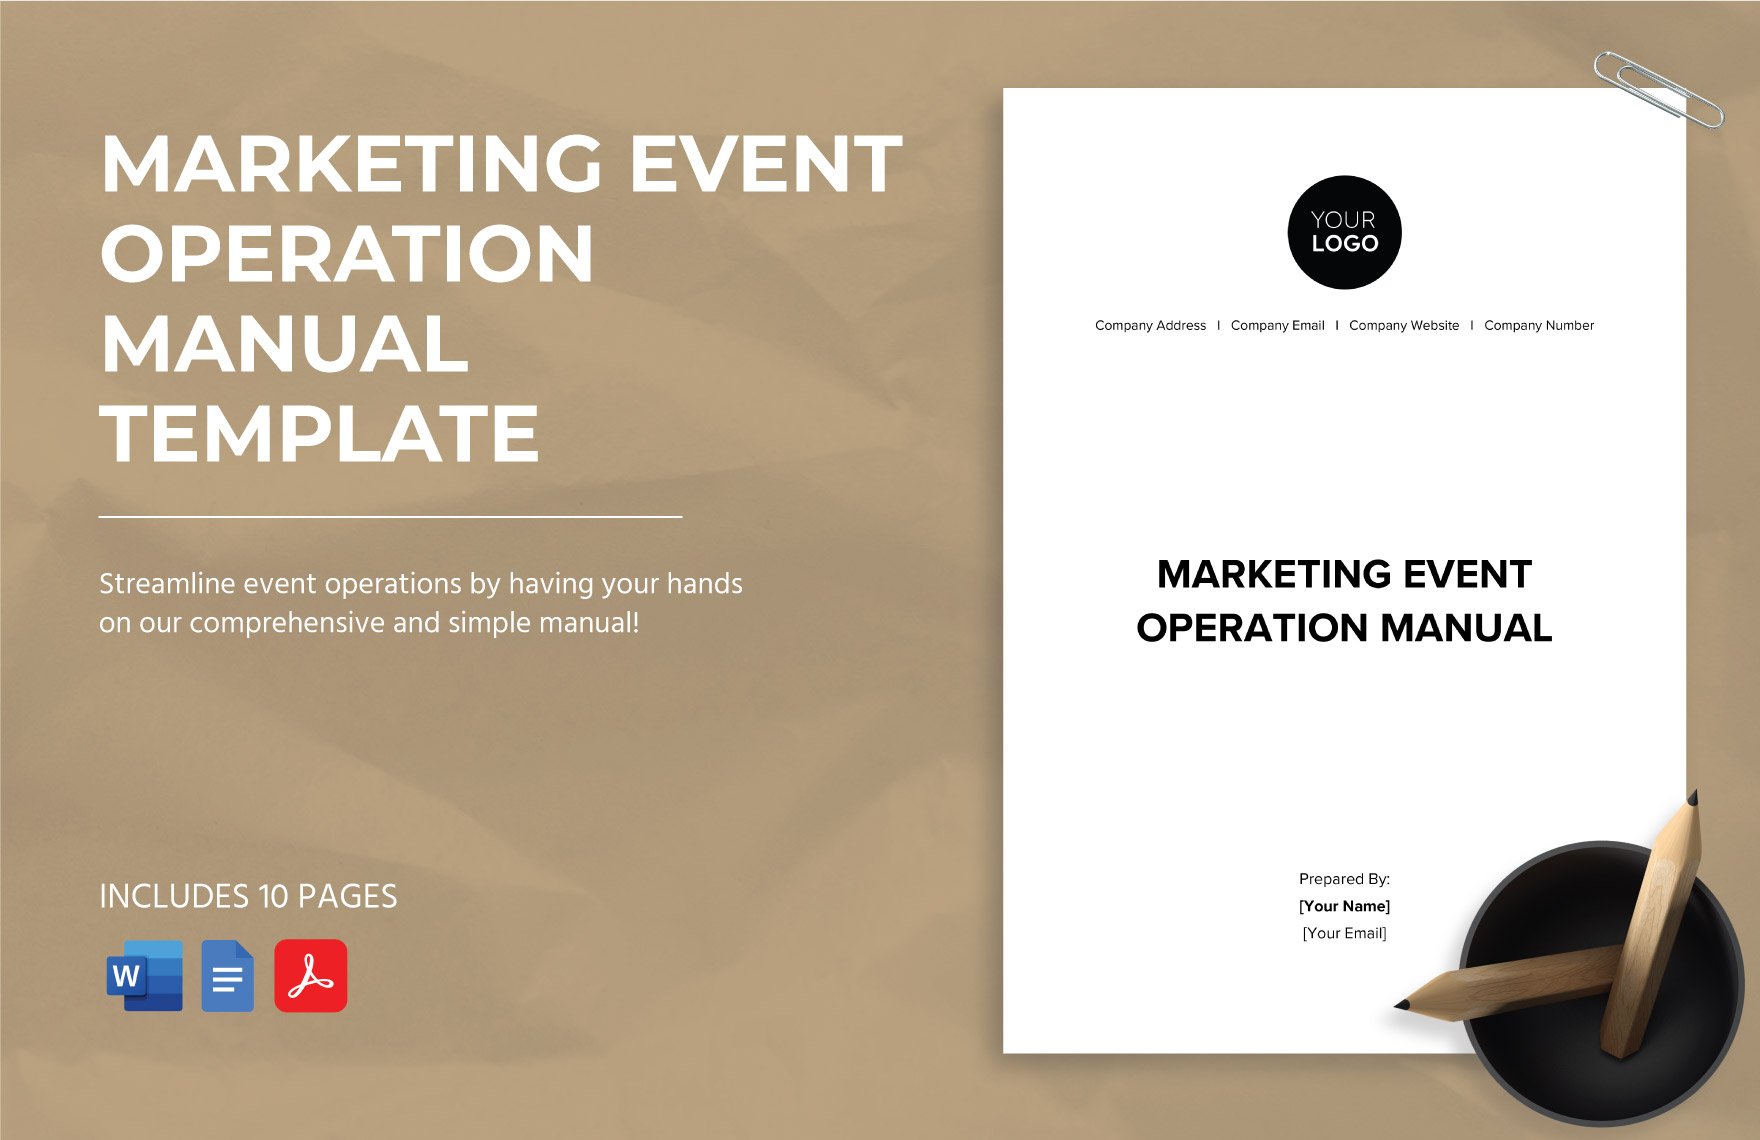 Marketing Event Operation Manual Template in Word, Google Docs, PDF